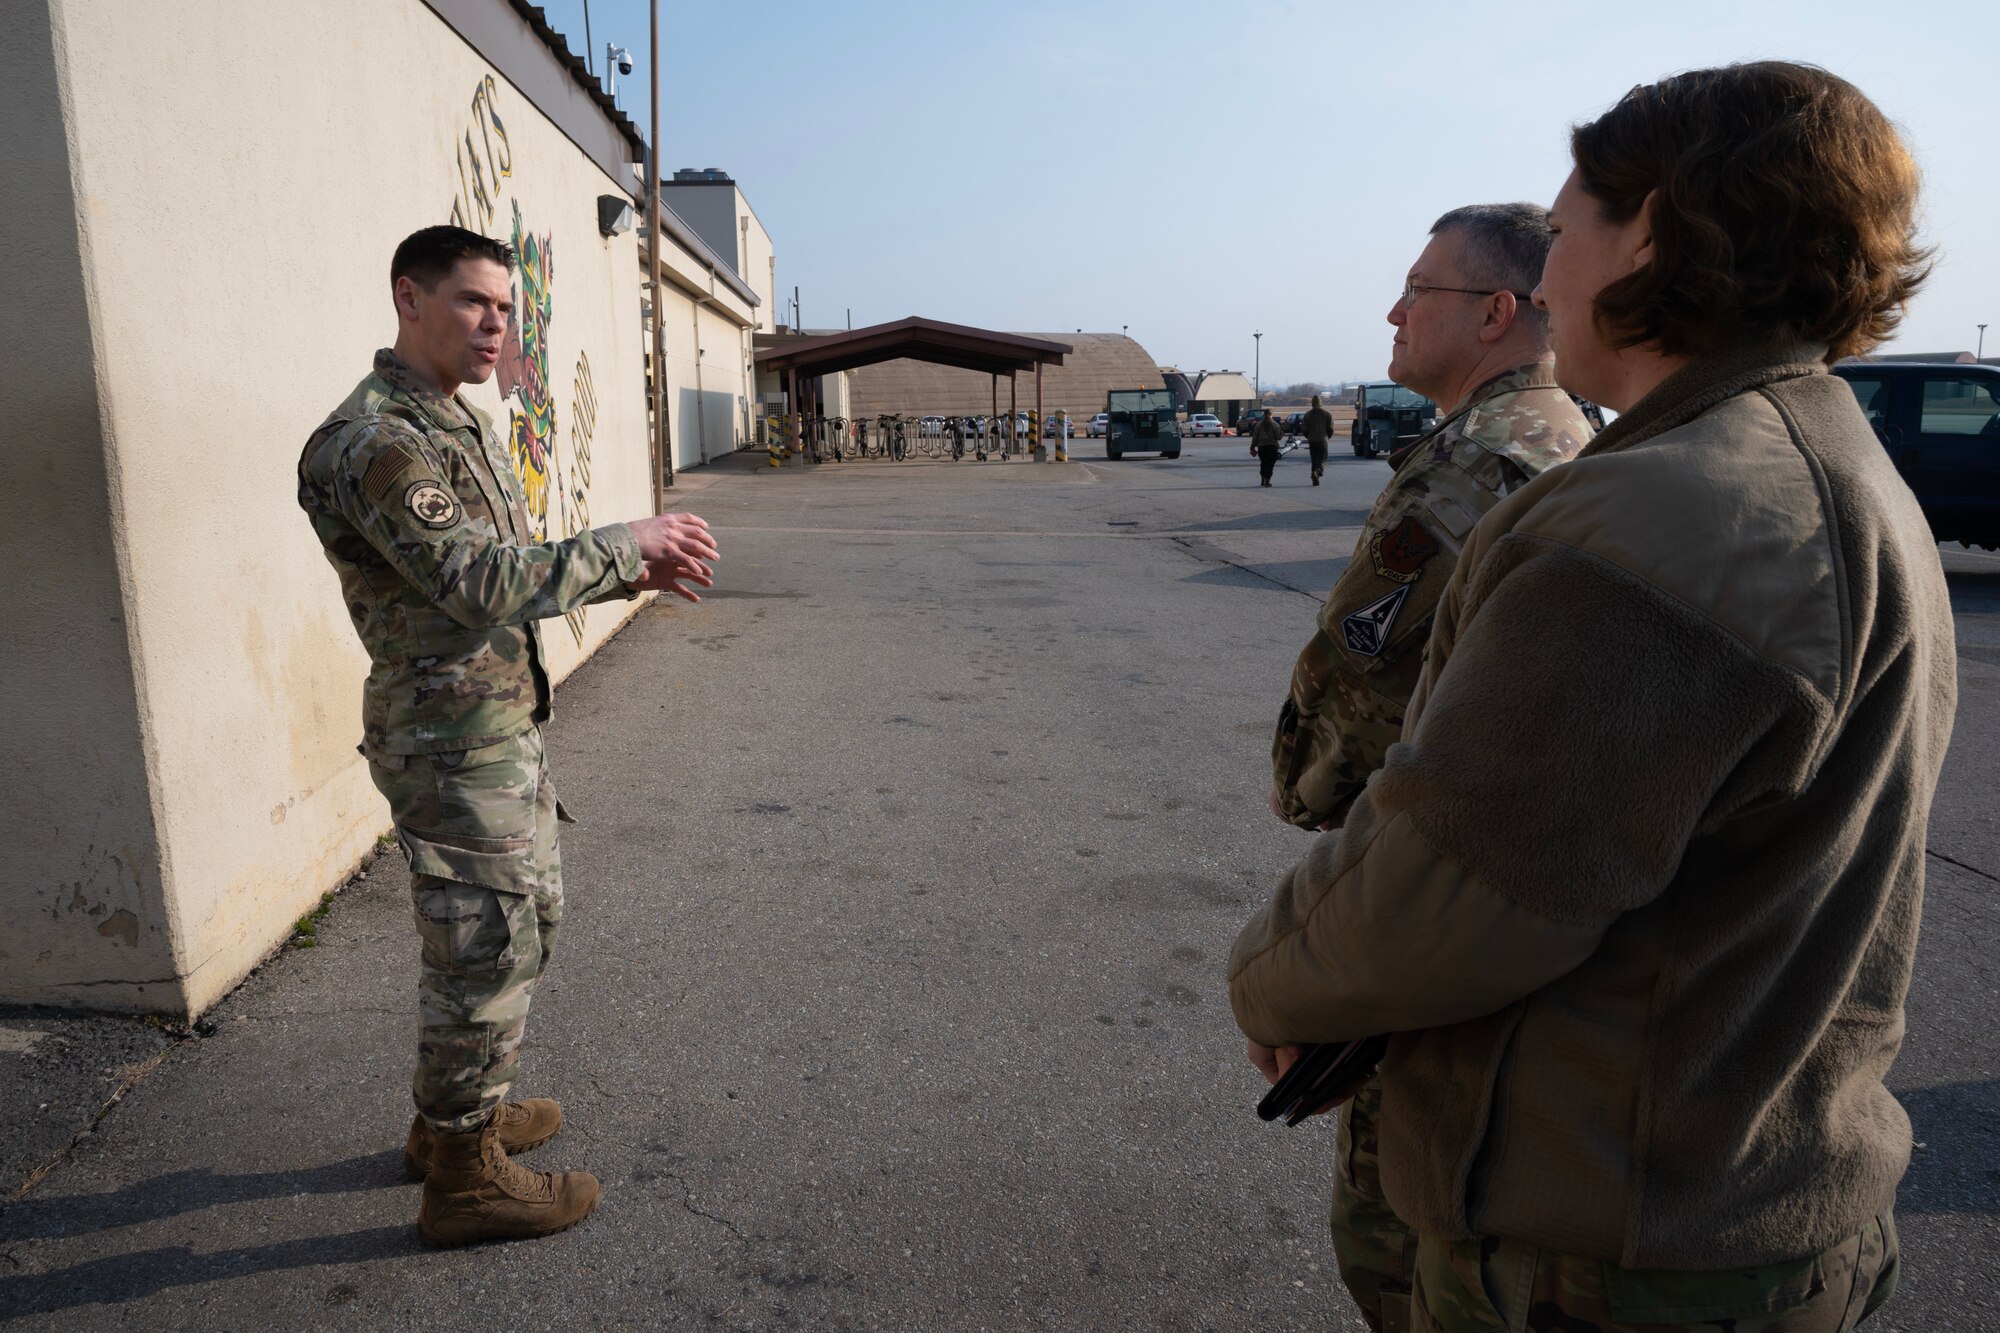 U.S. Air Force Lt. Col. Steven Massara (left), 80th Fighter Squadron commander, speaks to Ch. (Maj. Gen.) Randall Kitchens (mid), Department of the Air Force (DAF) chief of chaplains, and Chief Master Sgt. Sadie Chambers, DAF religious affairs senior enlisted advisor, at Kunsan Air Base, Republic of Korea, Feb. 23, 2023. As part of their battlefield circulation, Kitchens and Chambers interacted with Wolf Pack Airmen across the installation. (U.S. Air Force photo by Senior Airman Akeem K. Campbell)